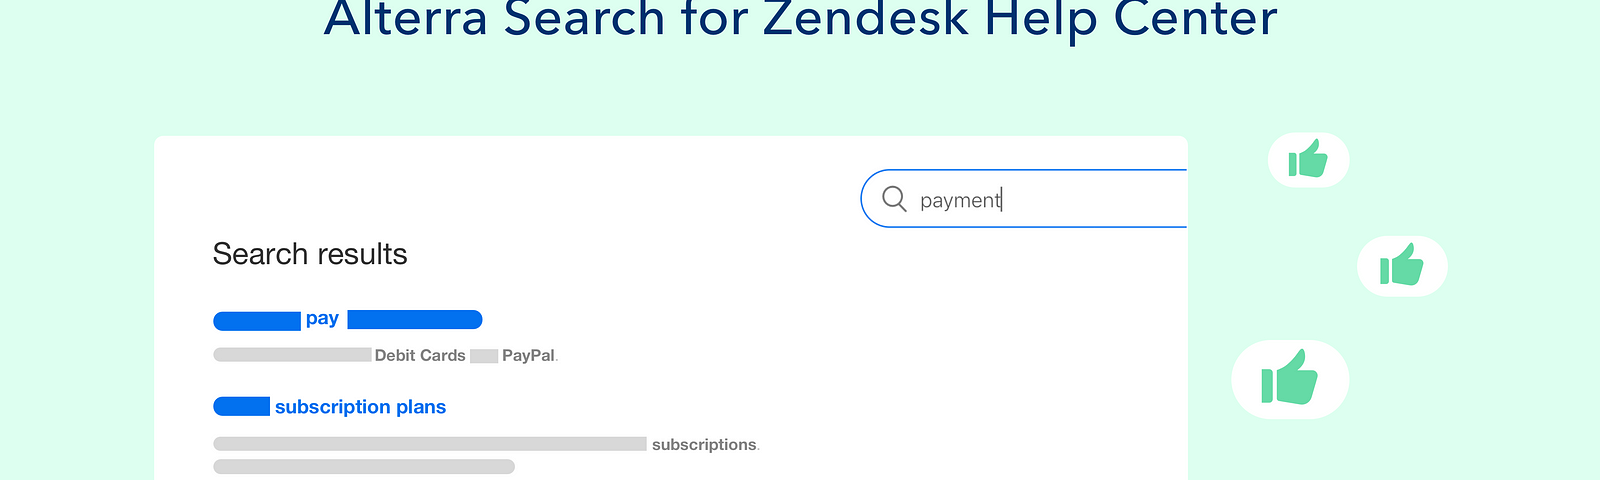 Alterra Search for Zendesk Guide provides smart search results that go beyond exact keyword match.